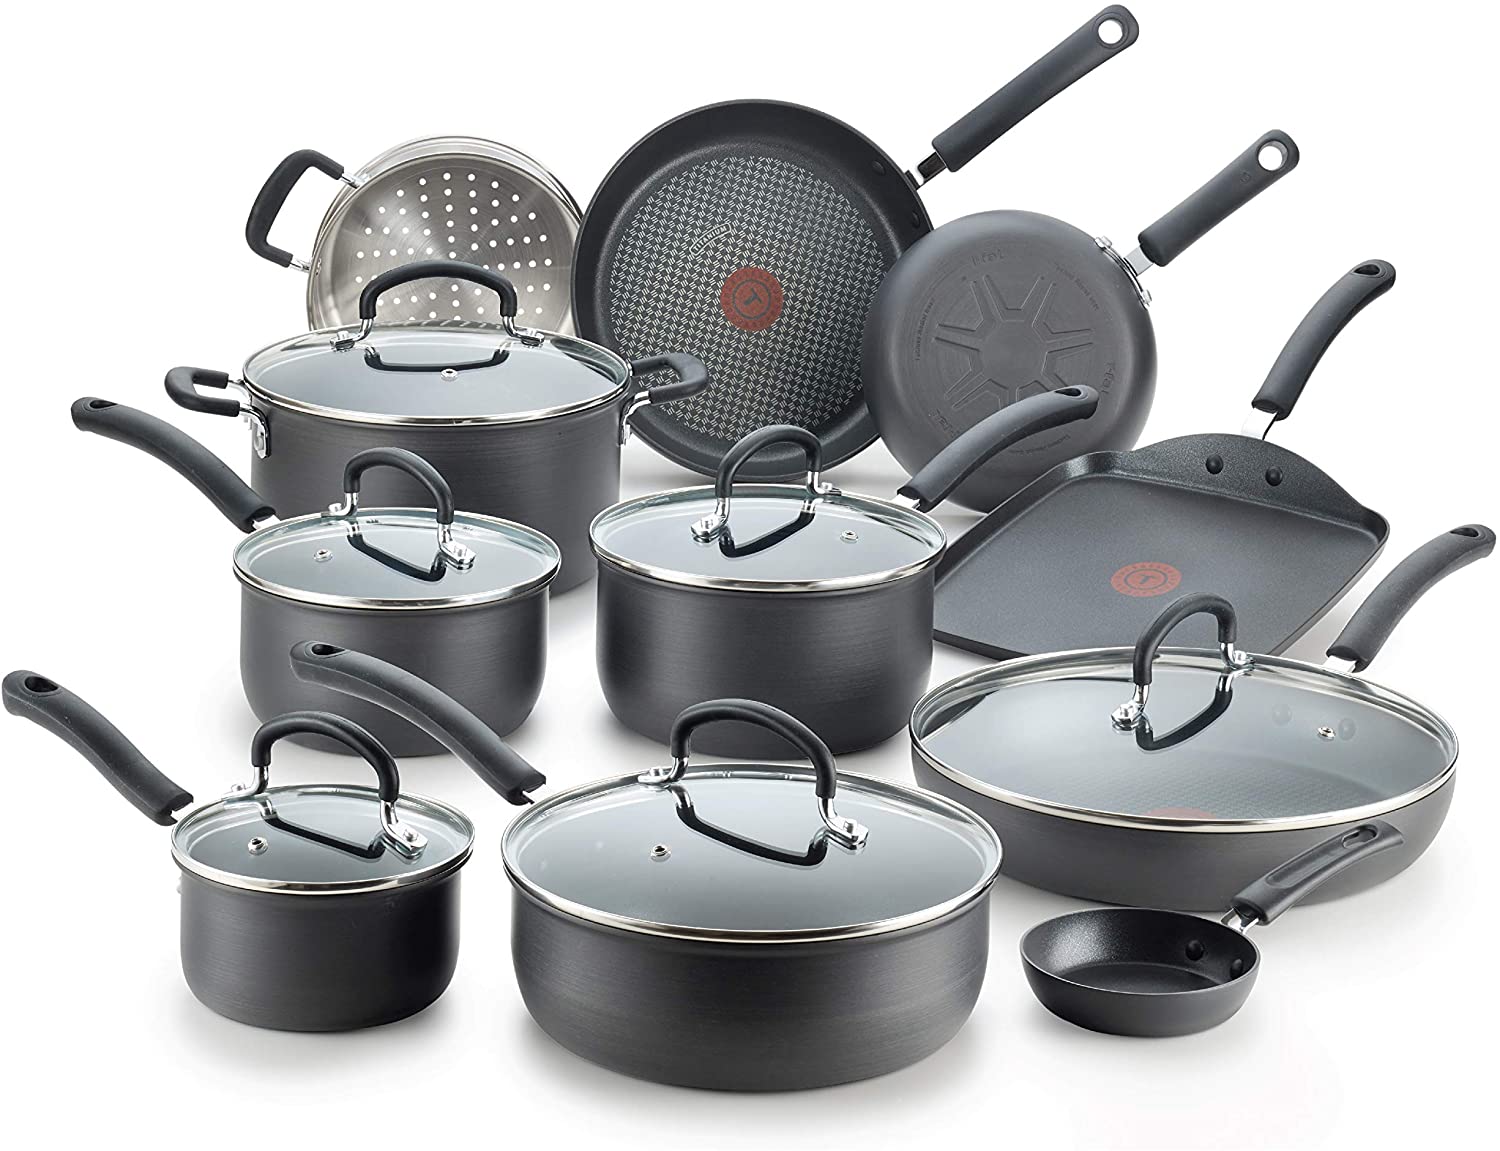 T-Fal-Ultimate-17-piece-Hard-anodized-Nonstick-Cookware-Set